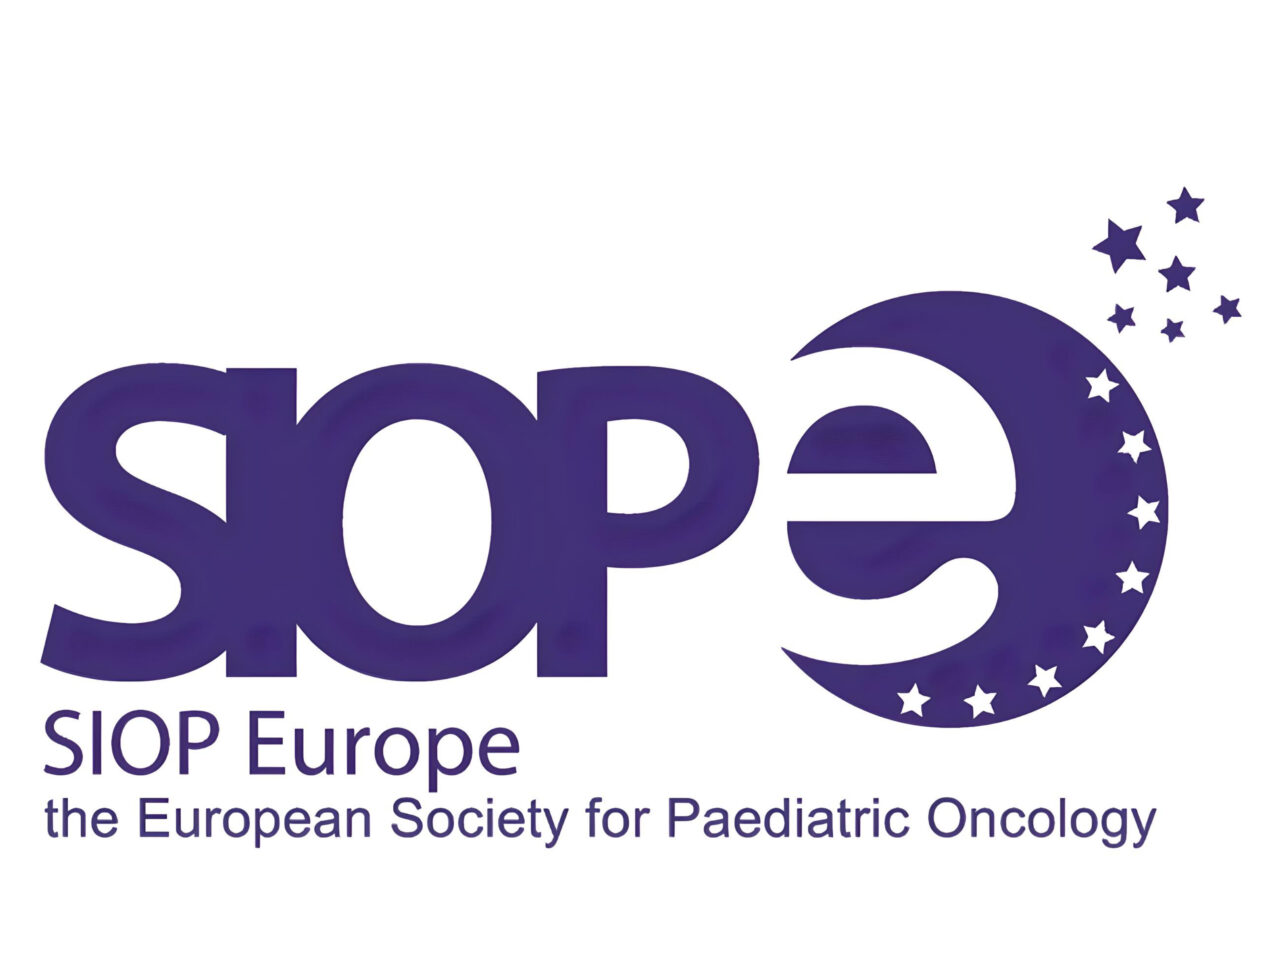 SIOPE is attending the ‘Equity, Diversity, and Inclusion (EDI) Principles in Cancer Care’ training in Romania!